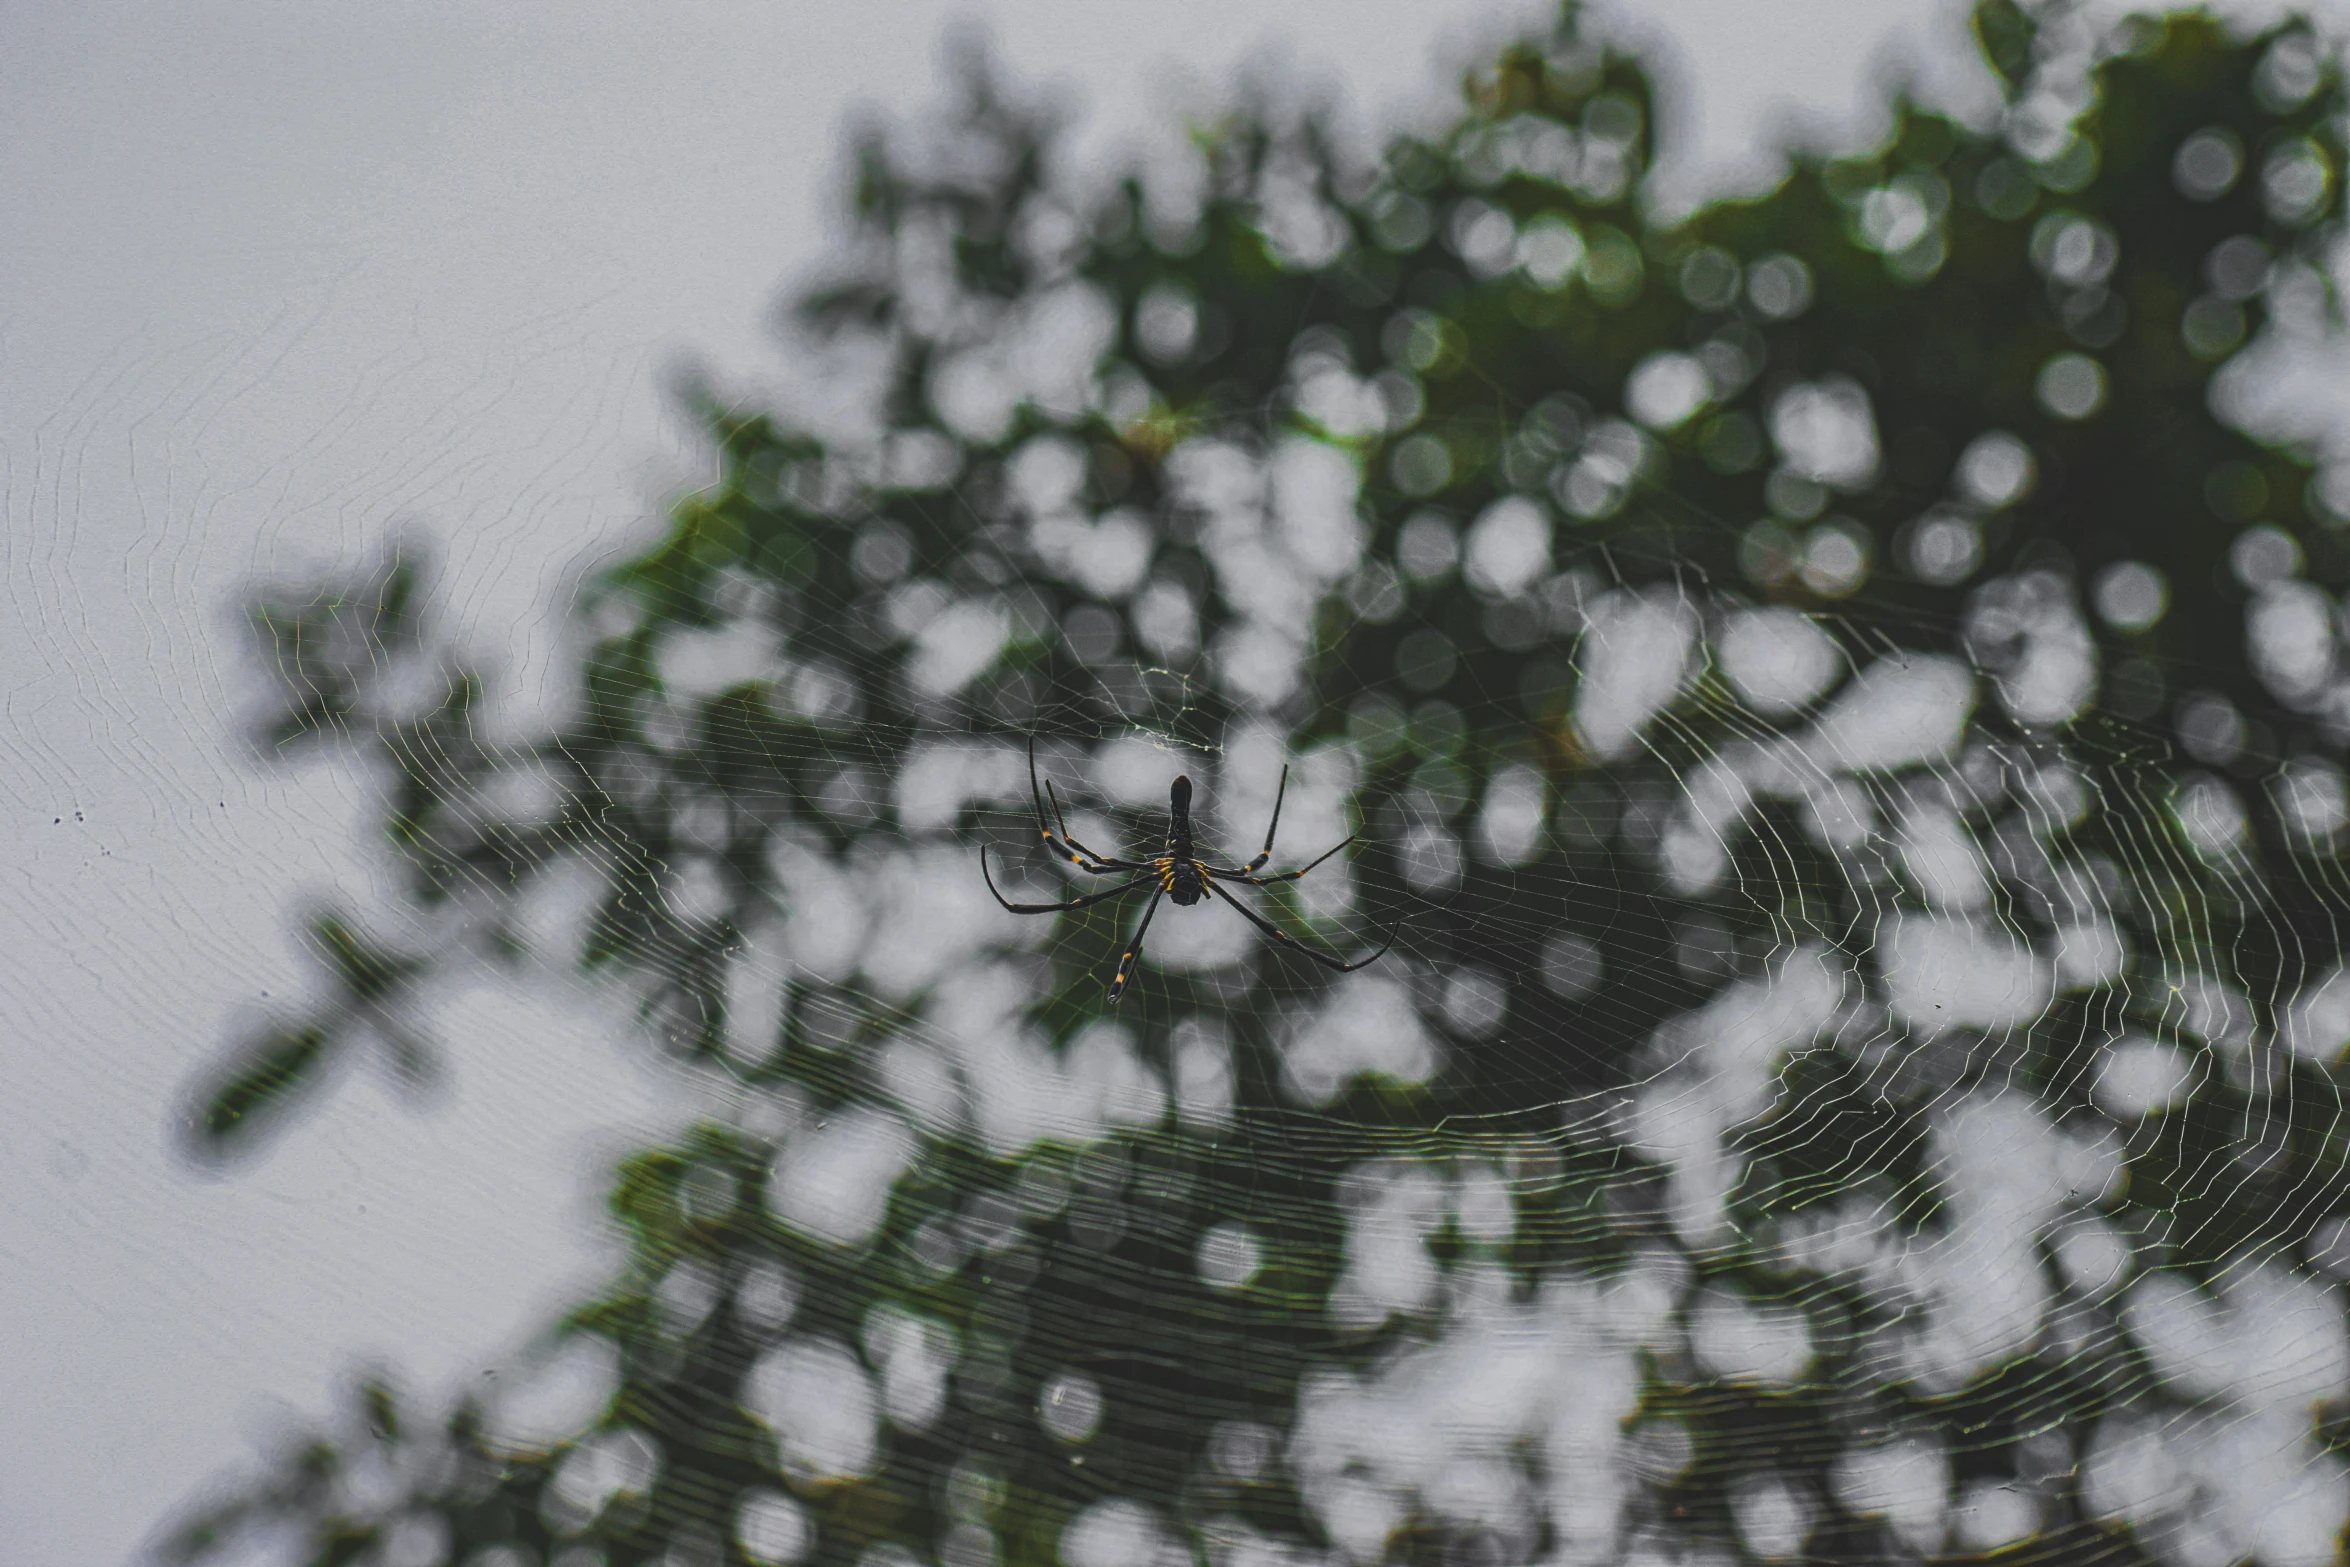 a web spider in the center of the po